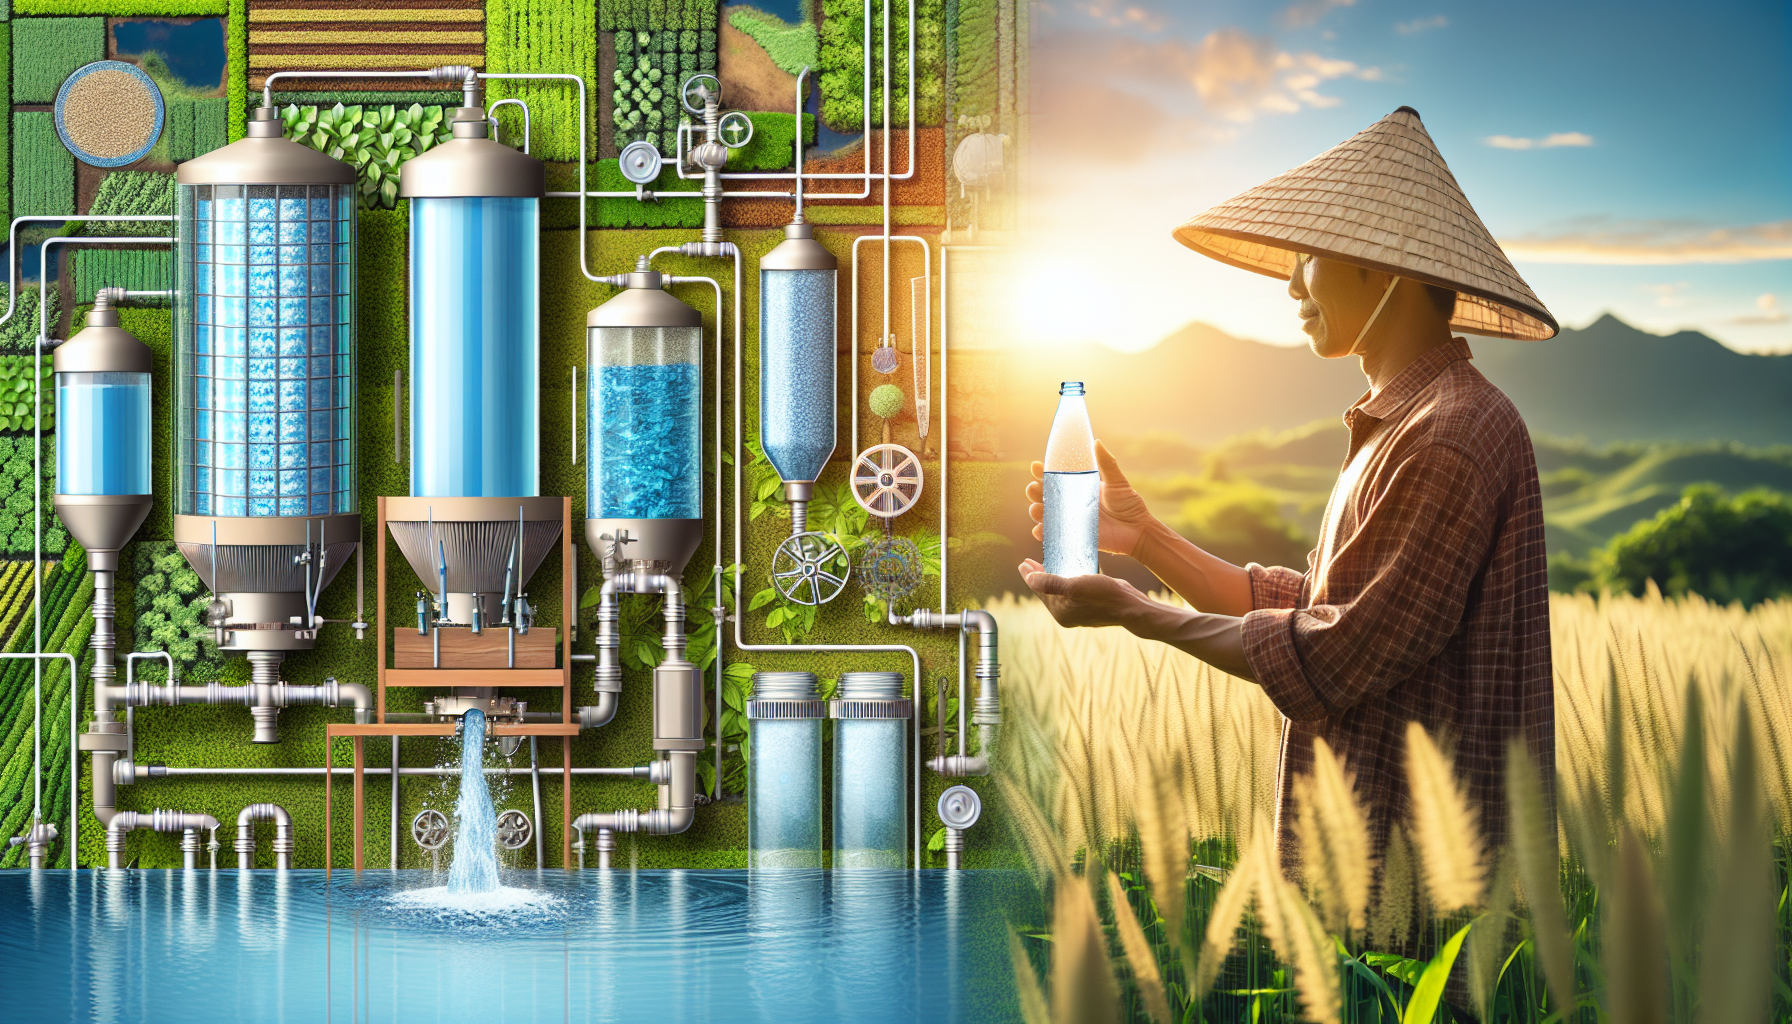 What Publications Provide Guidance On Well Water Treatment For Agricultural Contaminants?